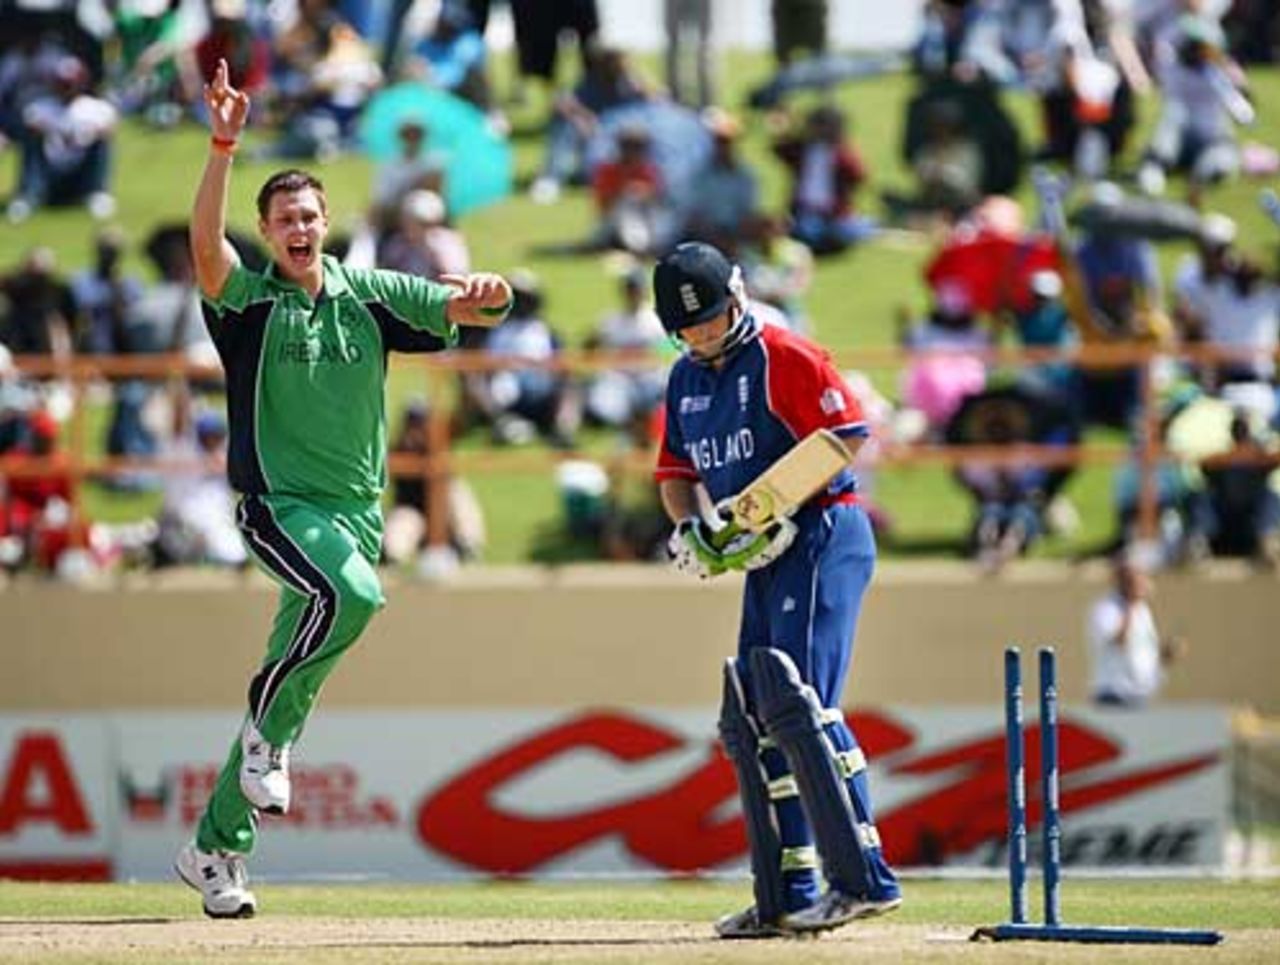 Ed Joyce looks back after deciding not to play a shot at Boyd Rankin's first ball, England v Ireland, Super Eights, Guyana, March 30, 2007